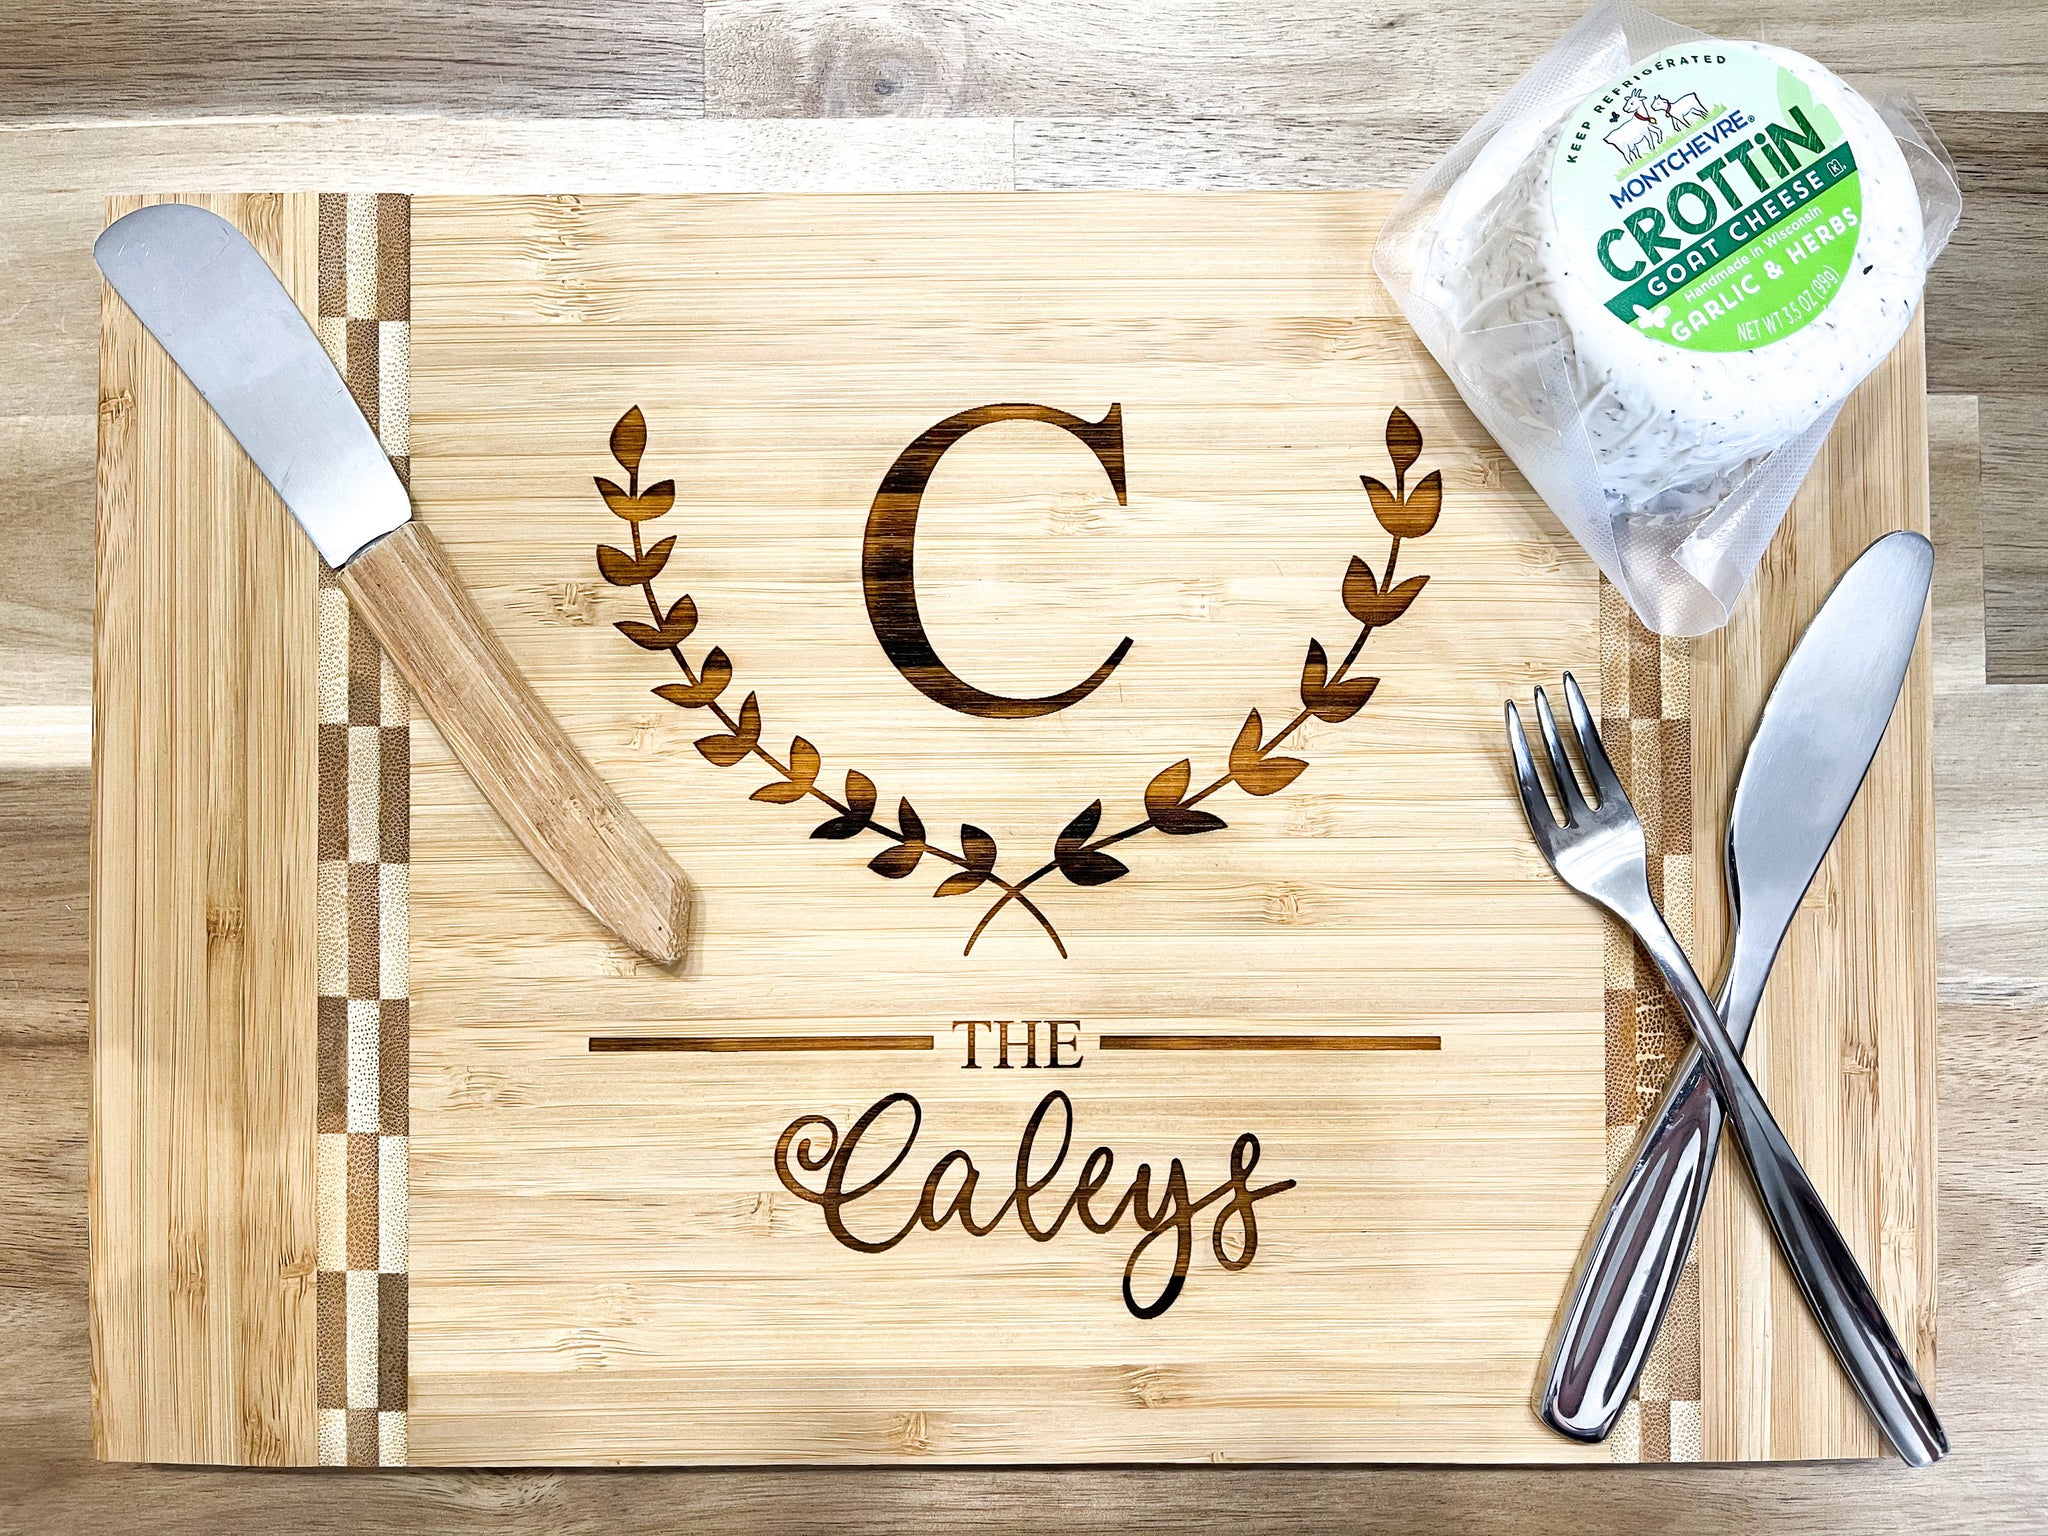 Wooden Cutting Board Personalized - Personalized Gallery